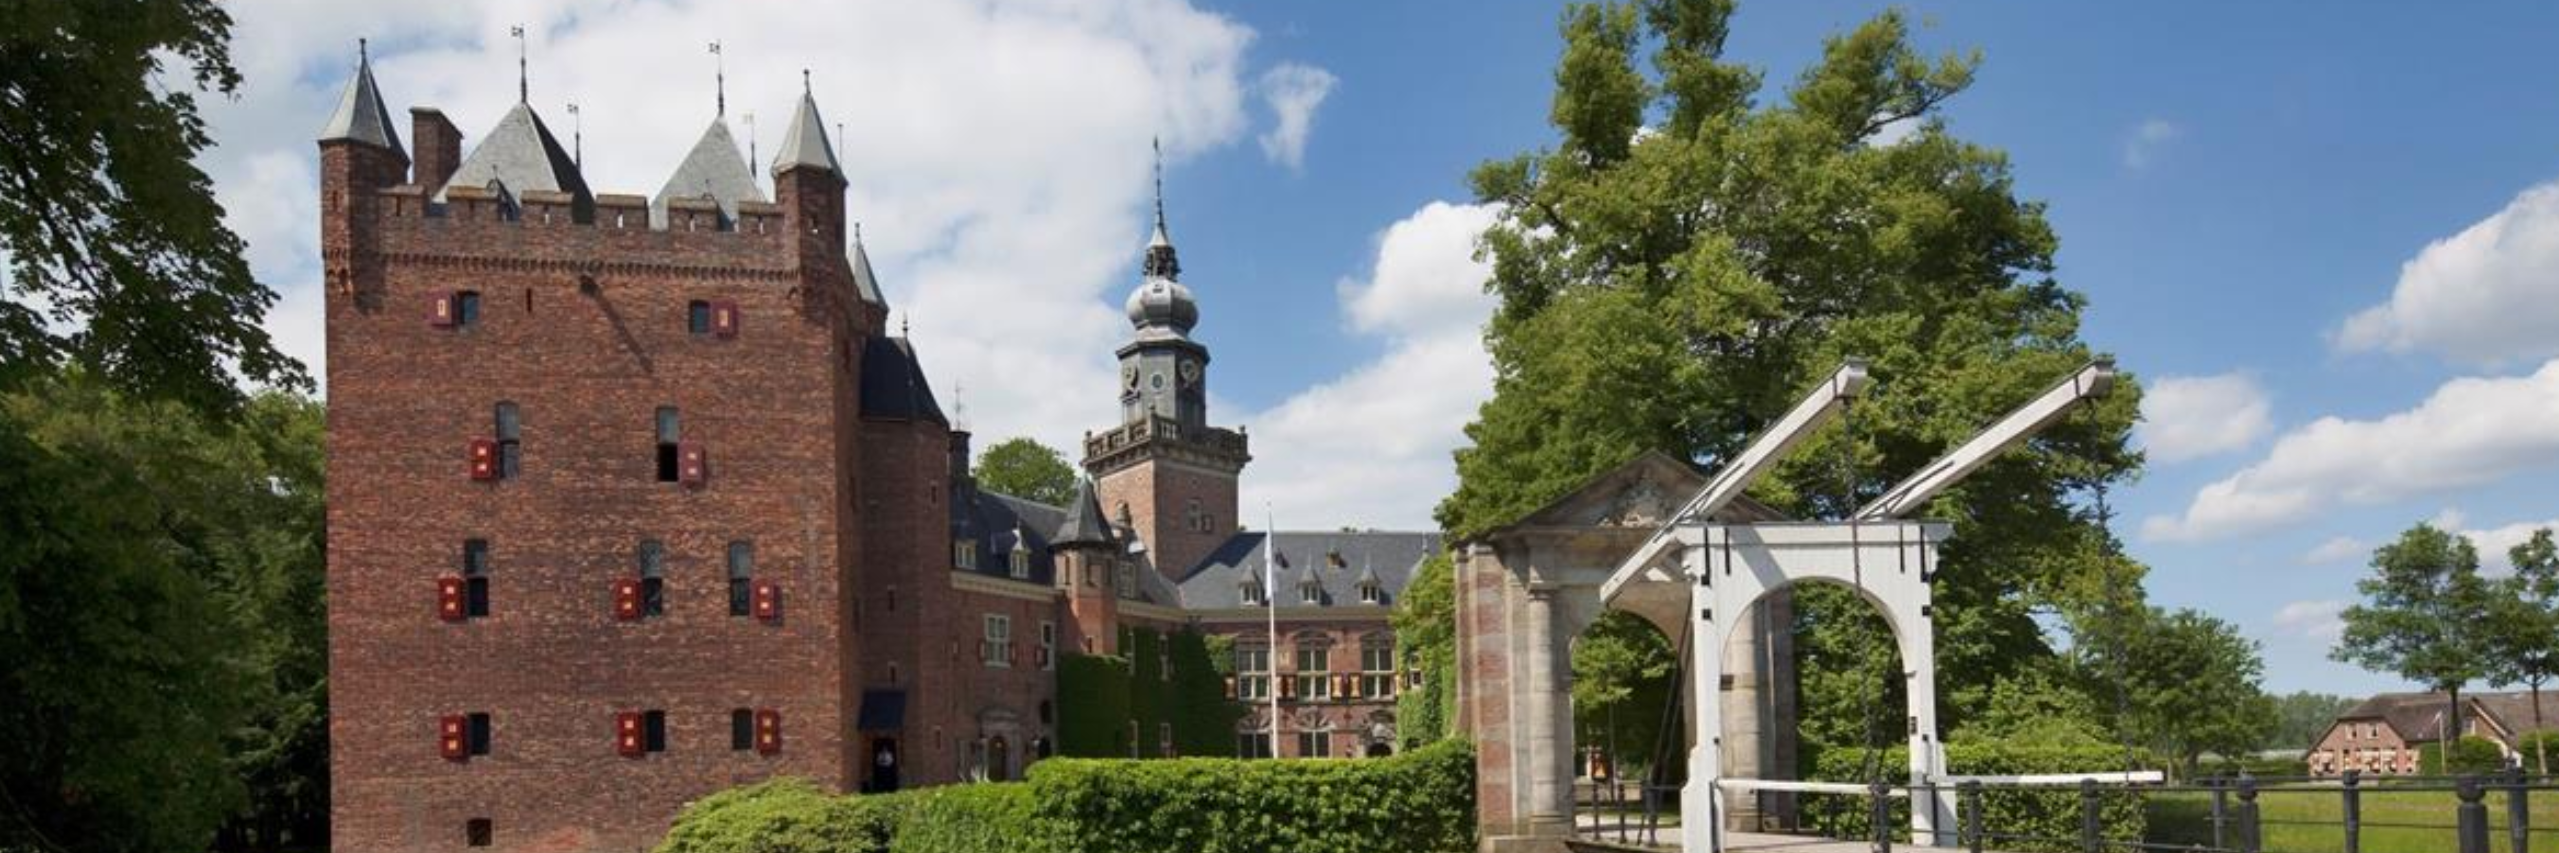 07-06-2023  New Product Development & Innovation by Nyenrode